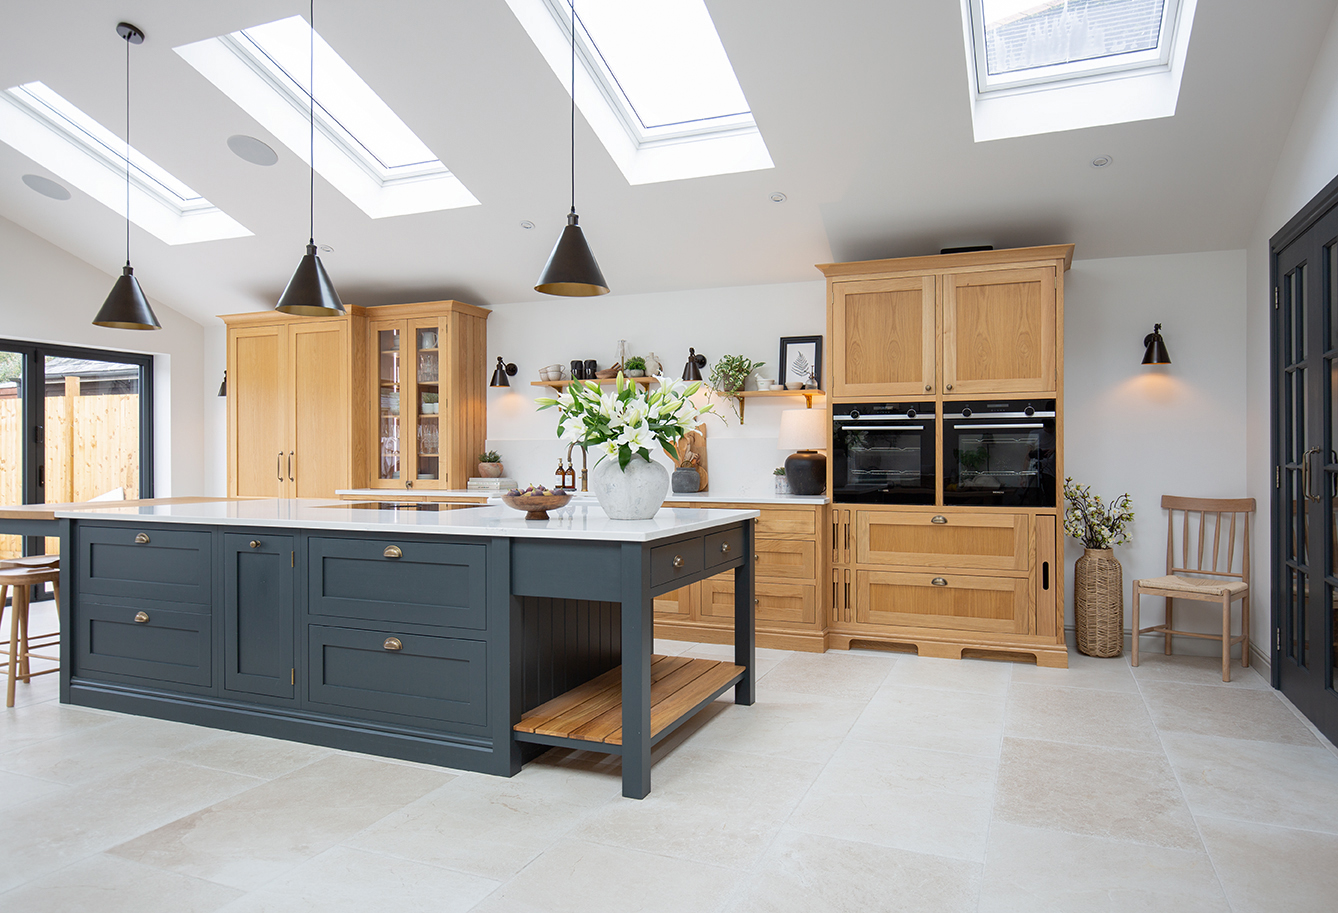 Quorn Stole tiles in a stunning kitchen project